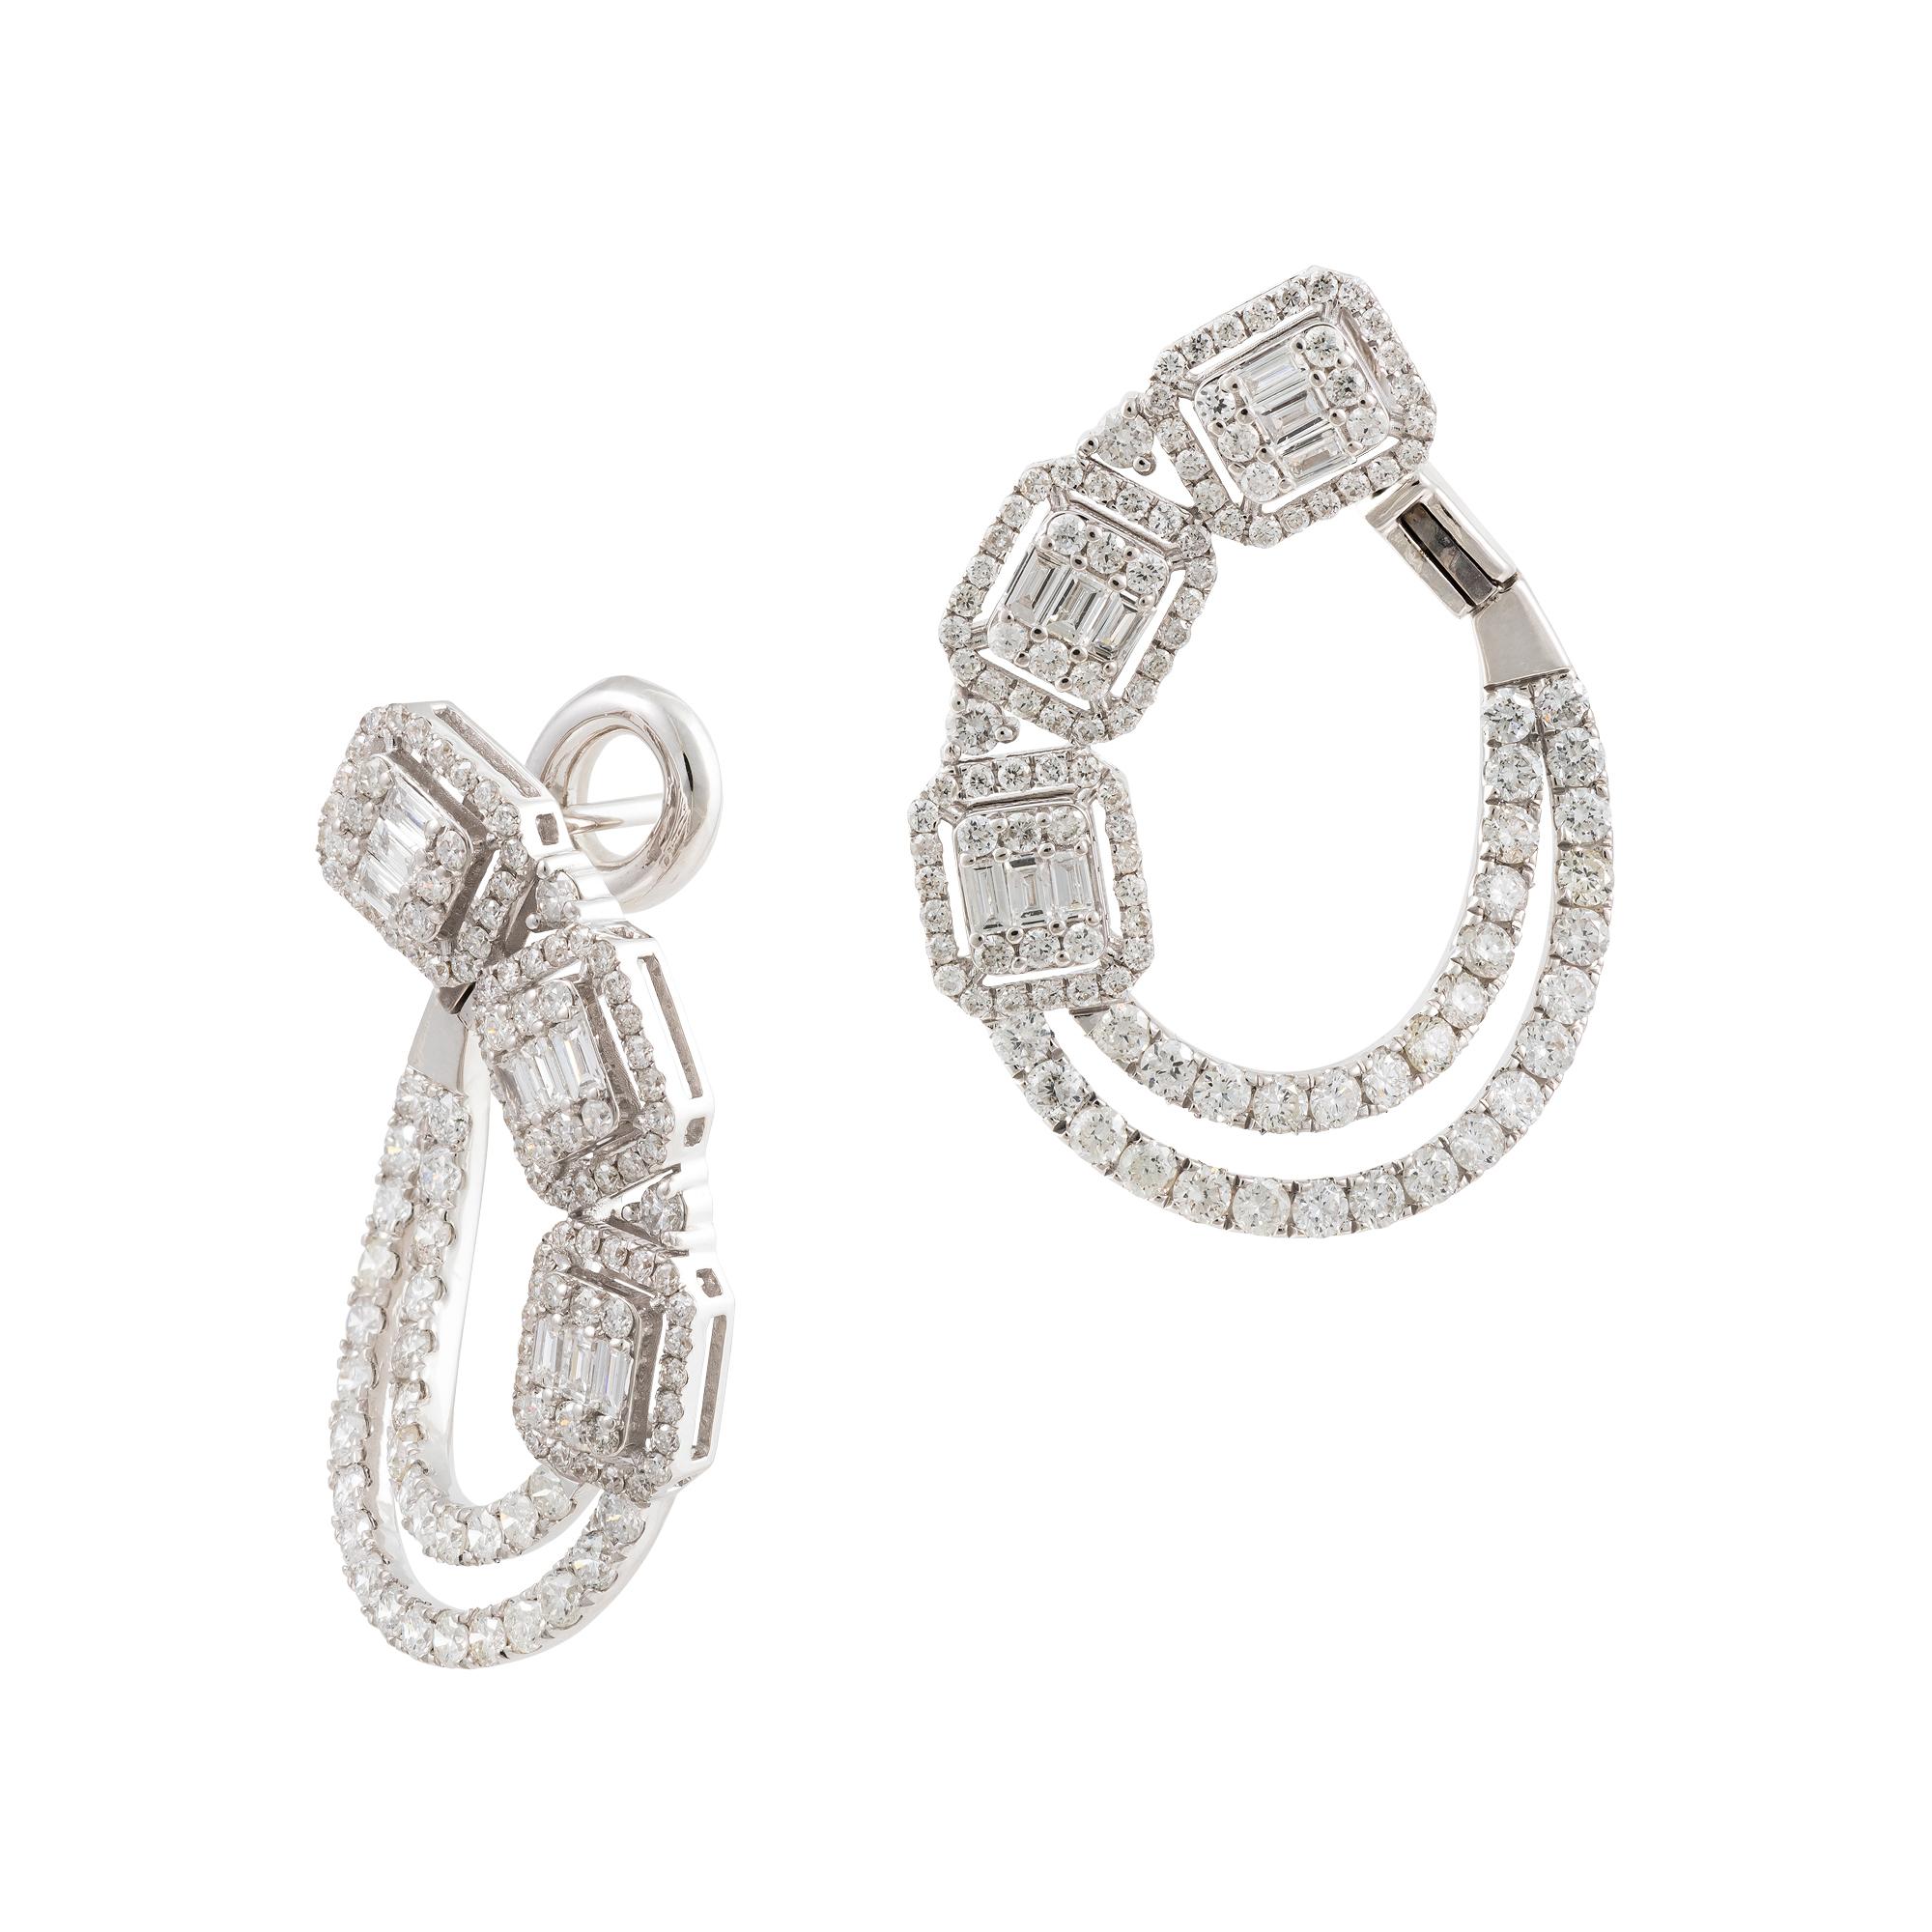 The Following Items we are offering is a Rare Important Radiant Pair of 18KT Gold Large Glistening Magnificent Large Fancy Baguette Diamond C Shape Twist Earrings. Stones are Very Clean and Extremely Fine! T.C.W. over 3CTS!!!  A near Identical Pair